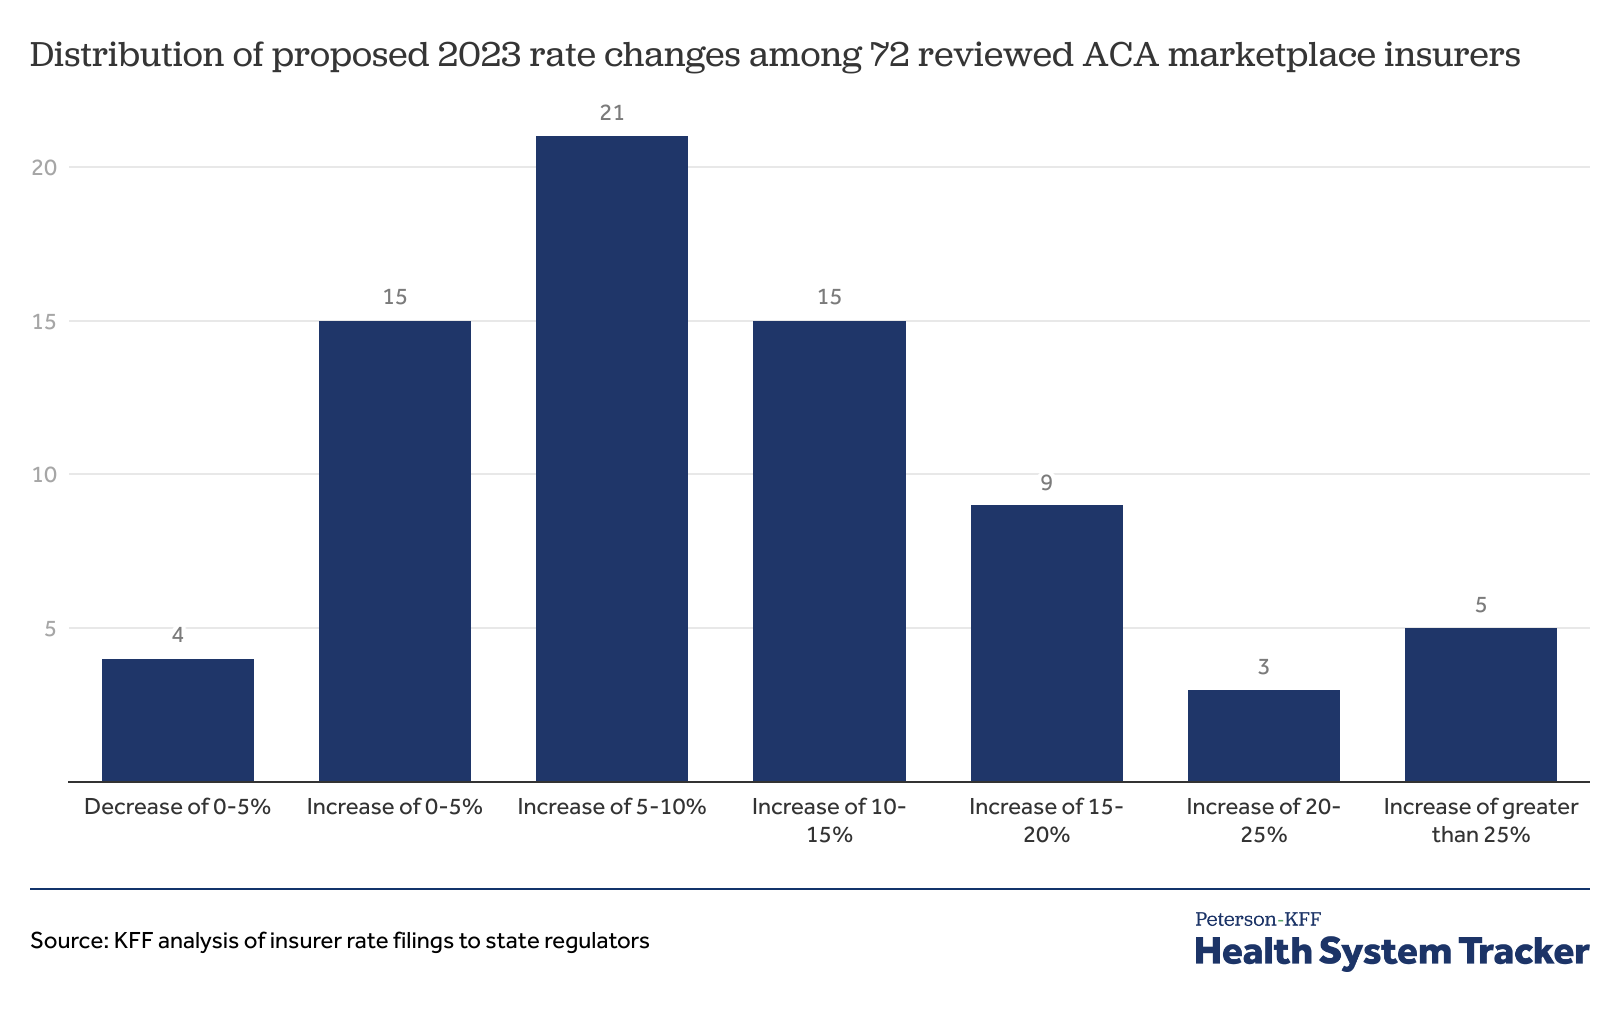 Obamacare has changed expectations on healthcare naturale tears alcon laboratories